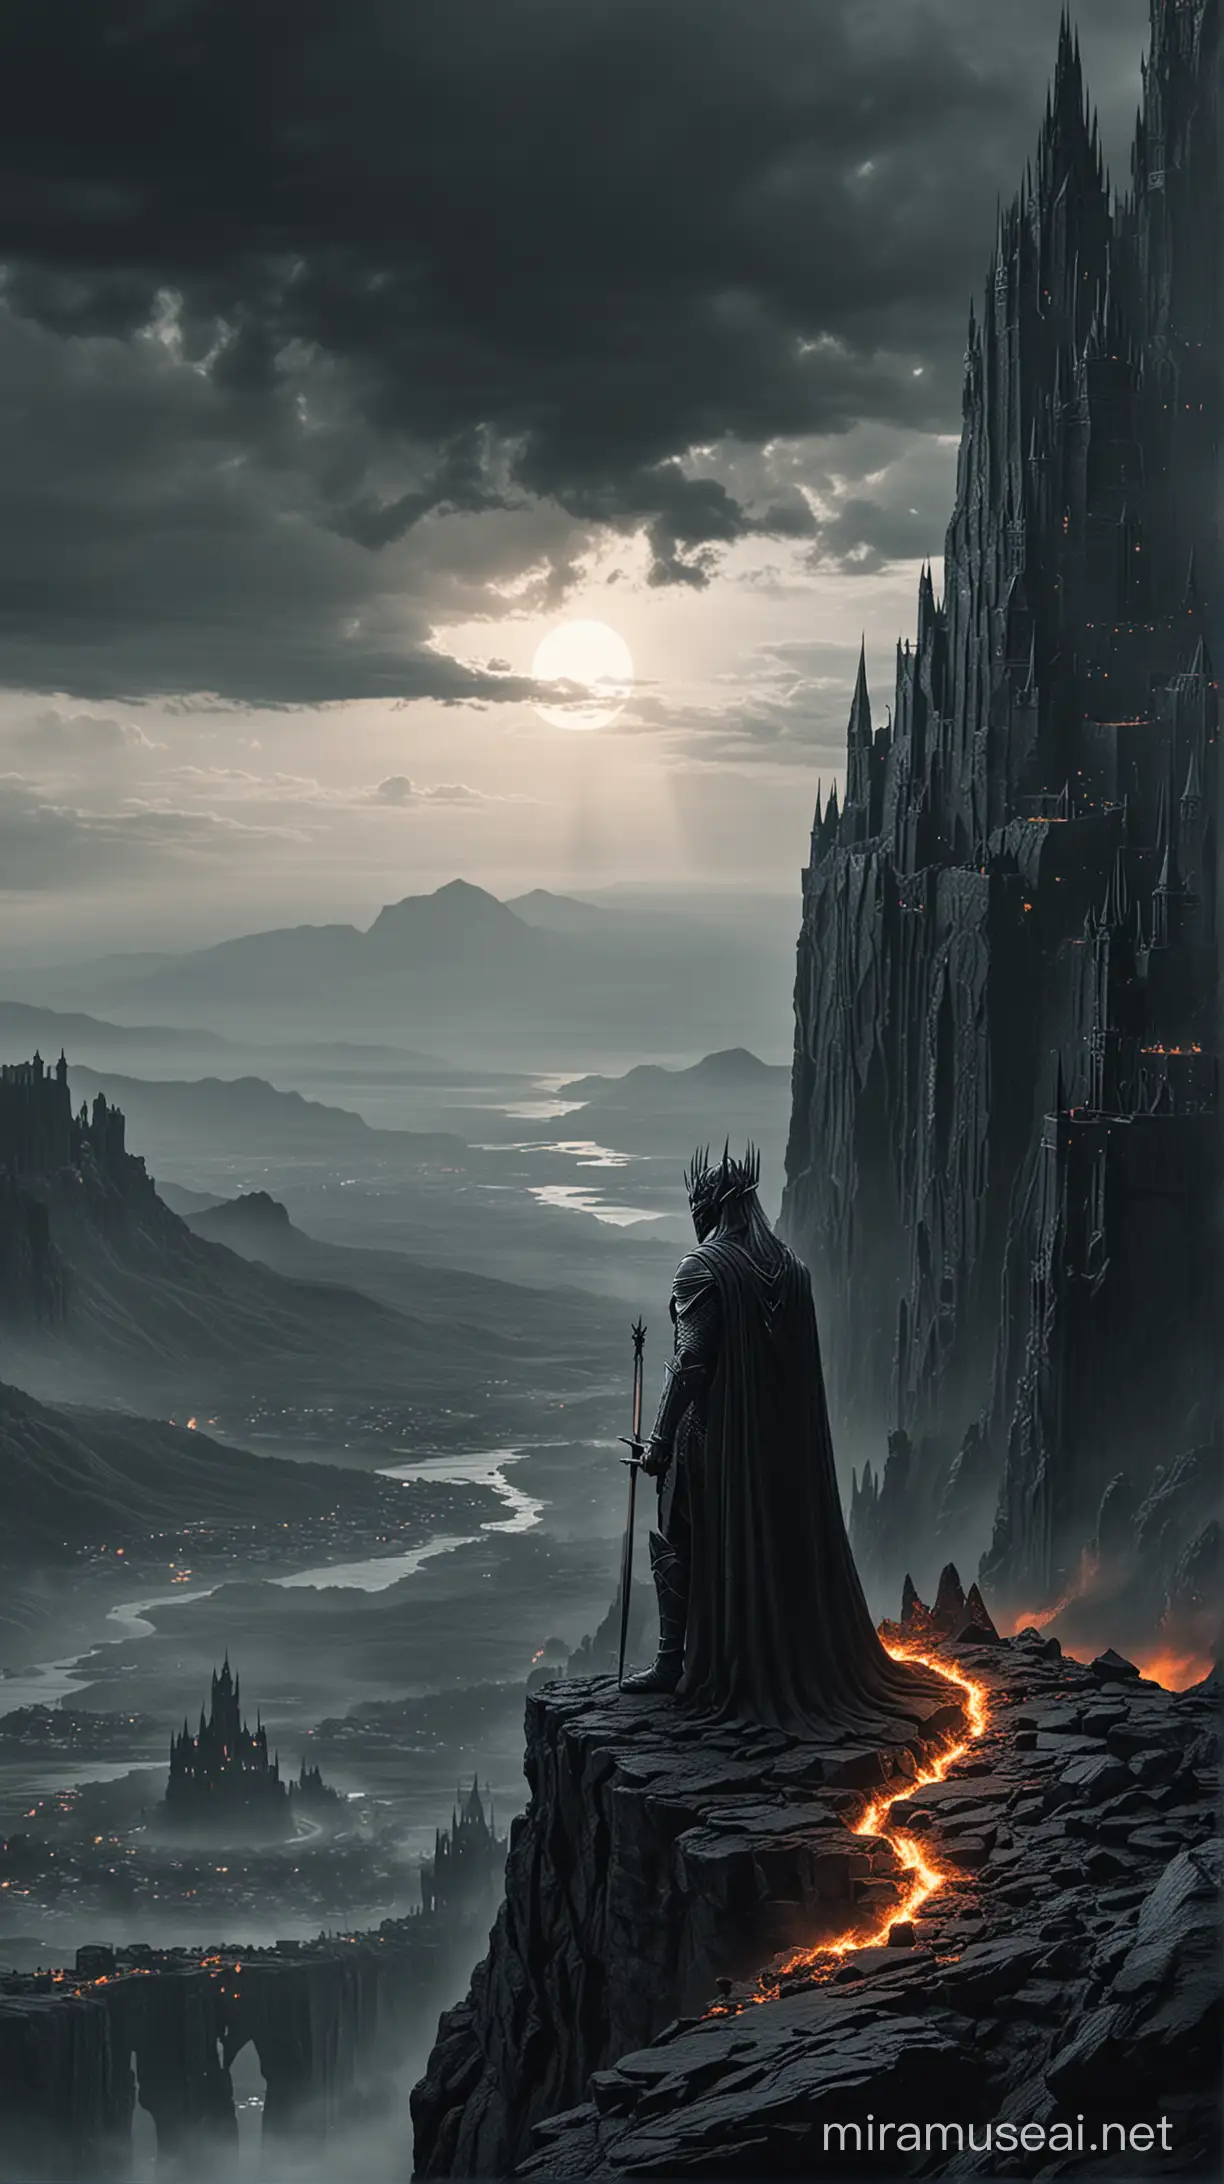 Sauron standing on a cliff facing his dark fortress